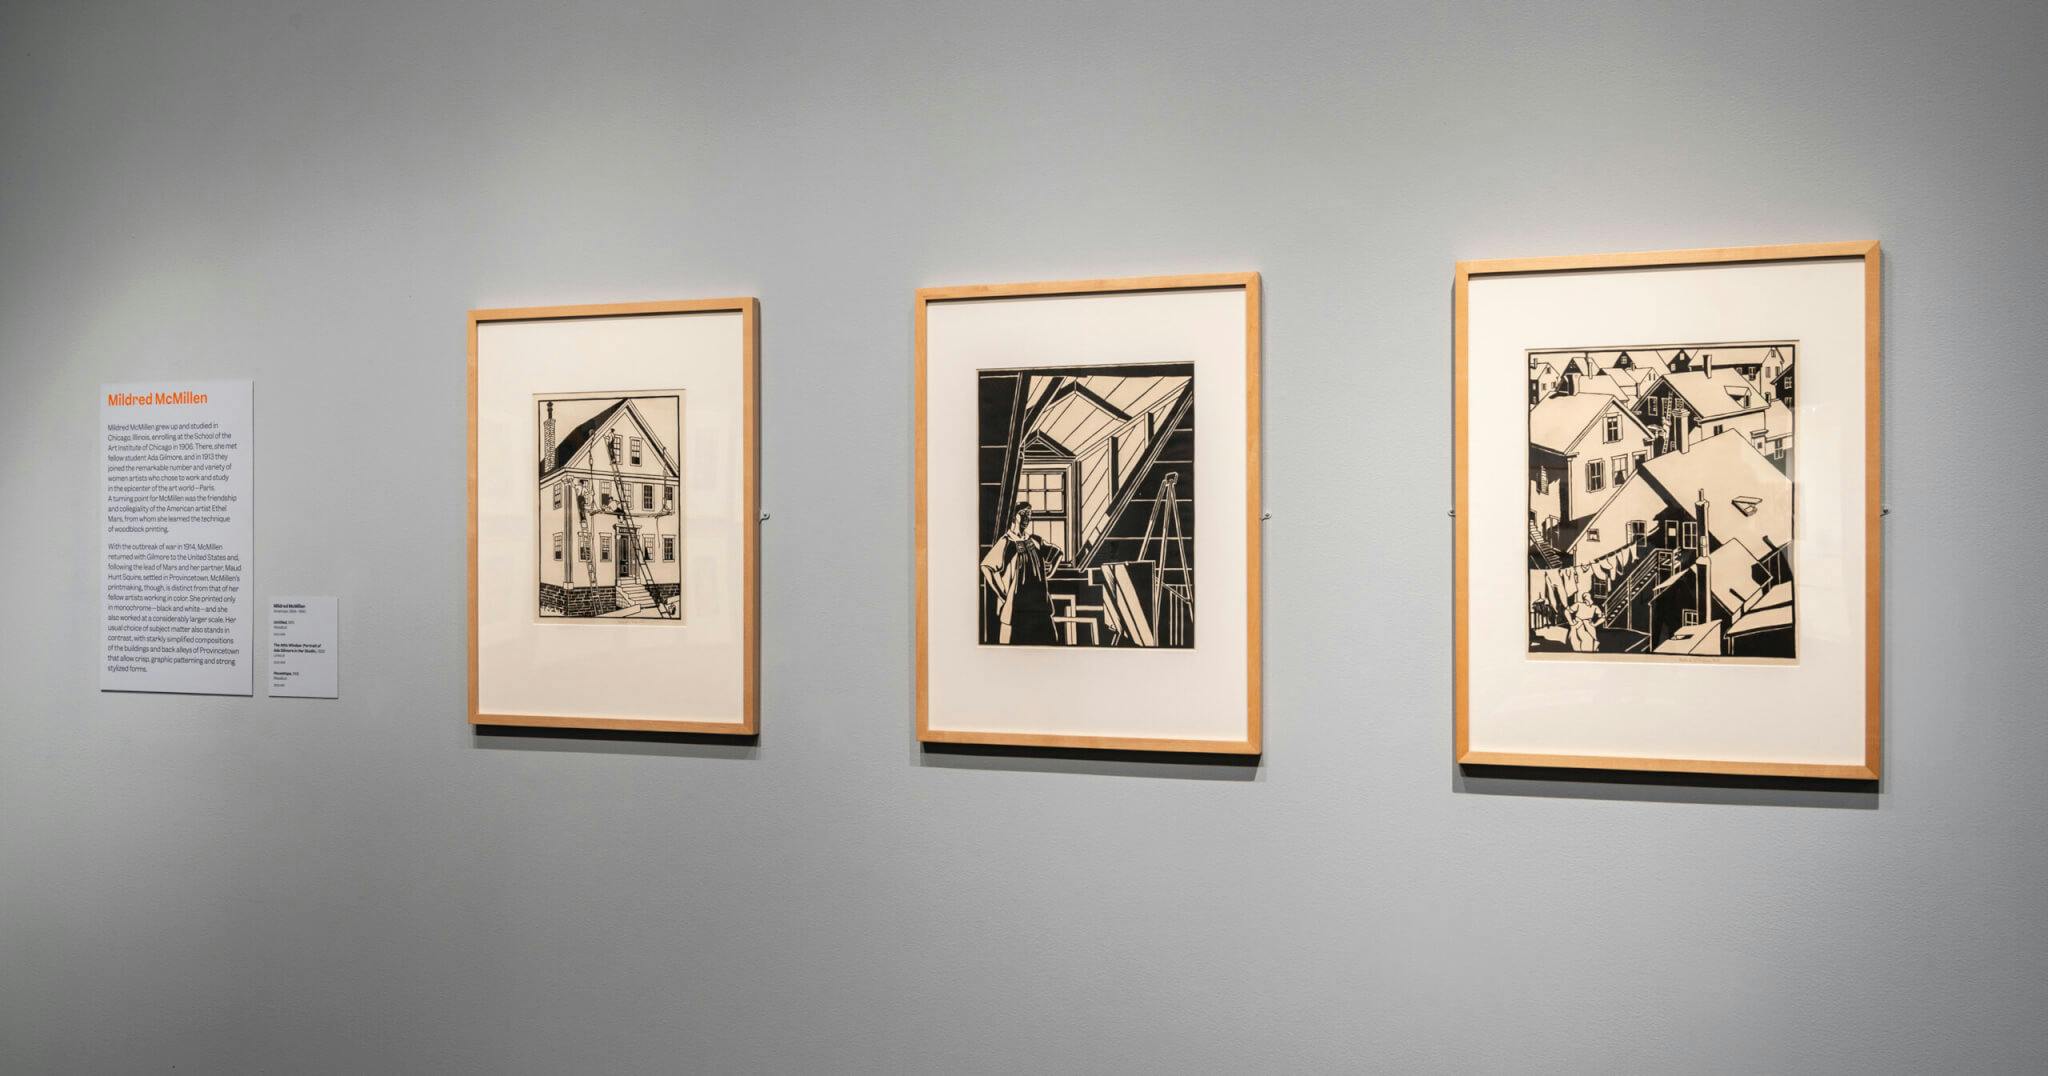 Installation view of "Provincetown Printmakers" at MFA, Boston, with three works by Mildred McMillen